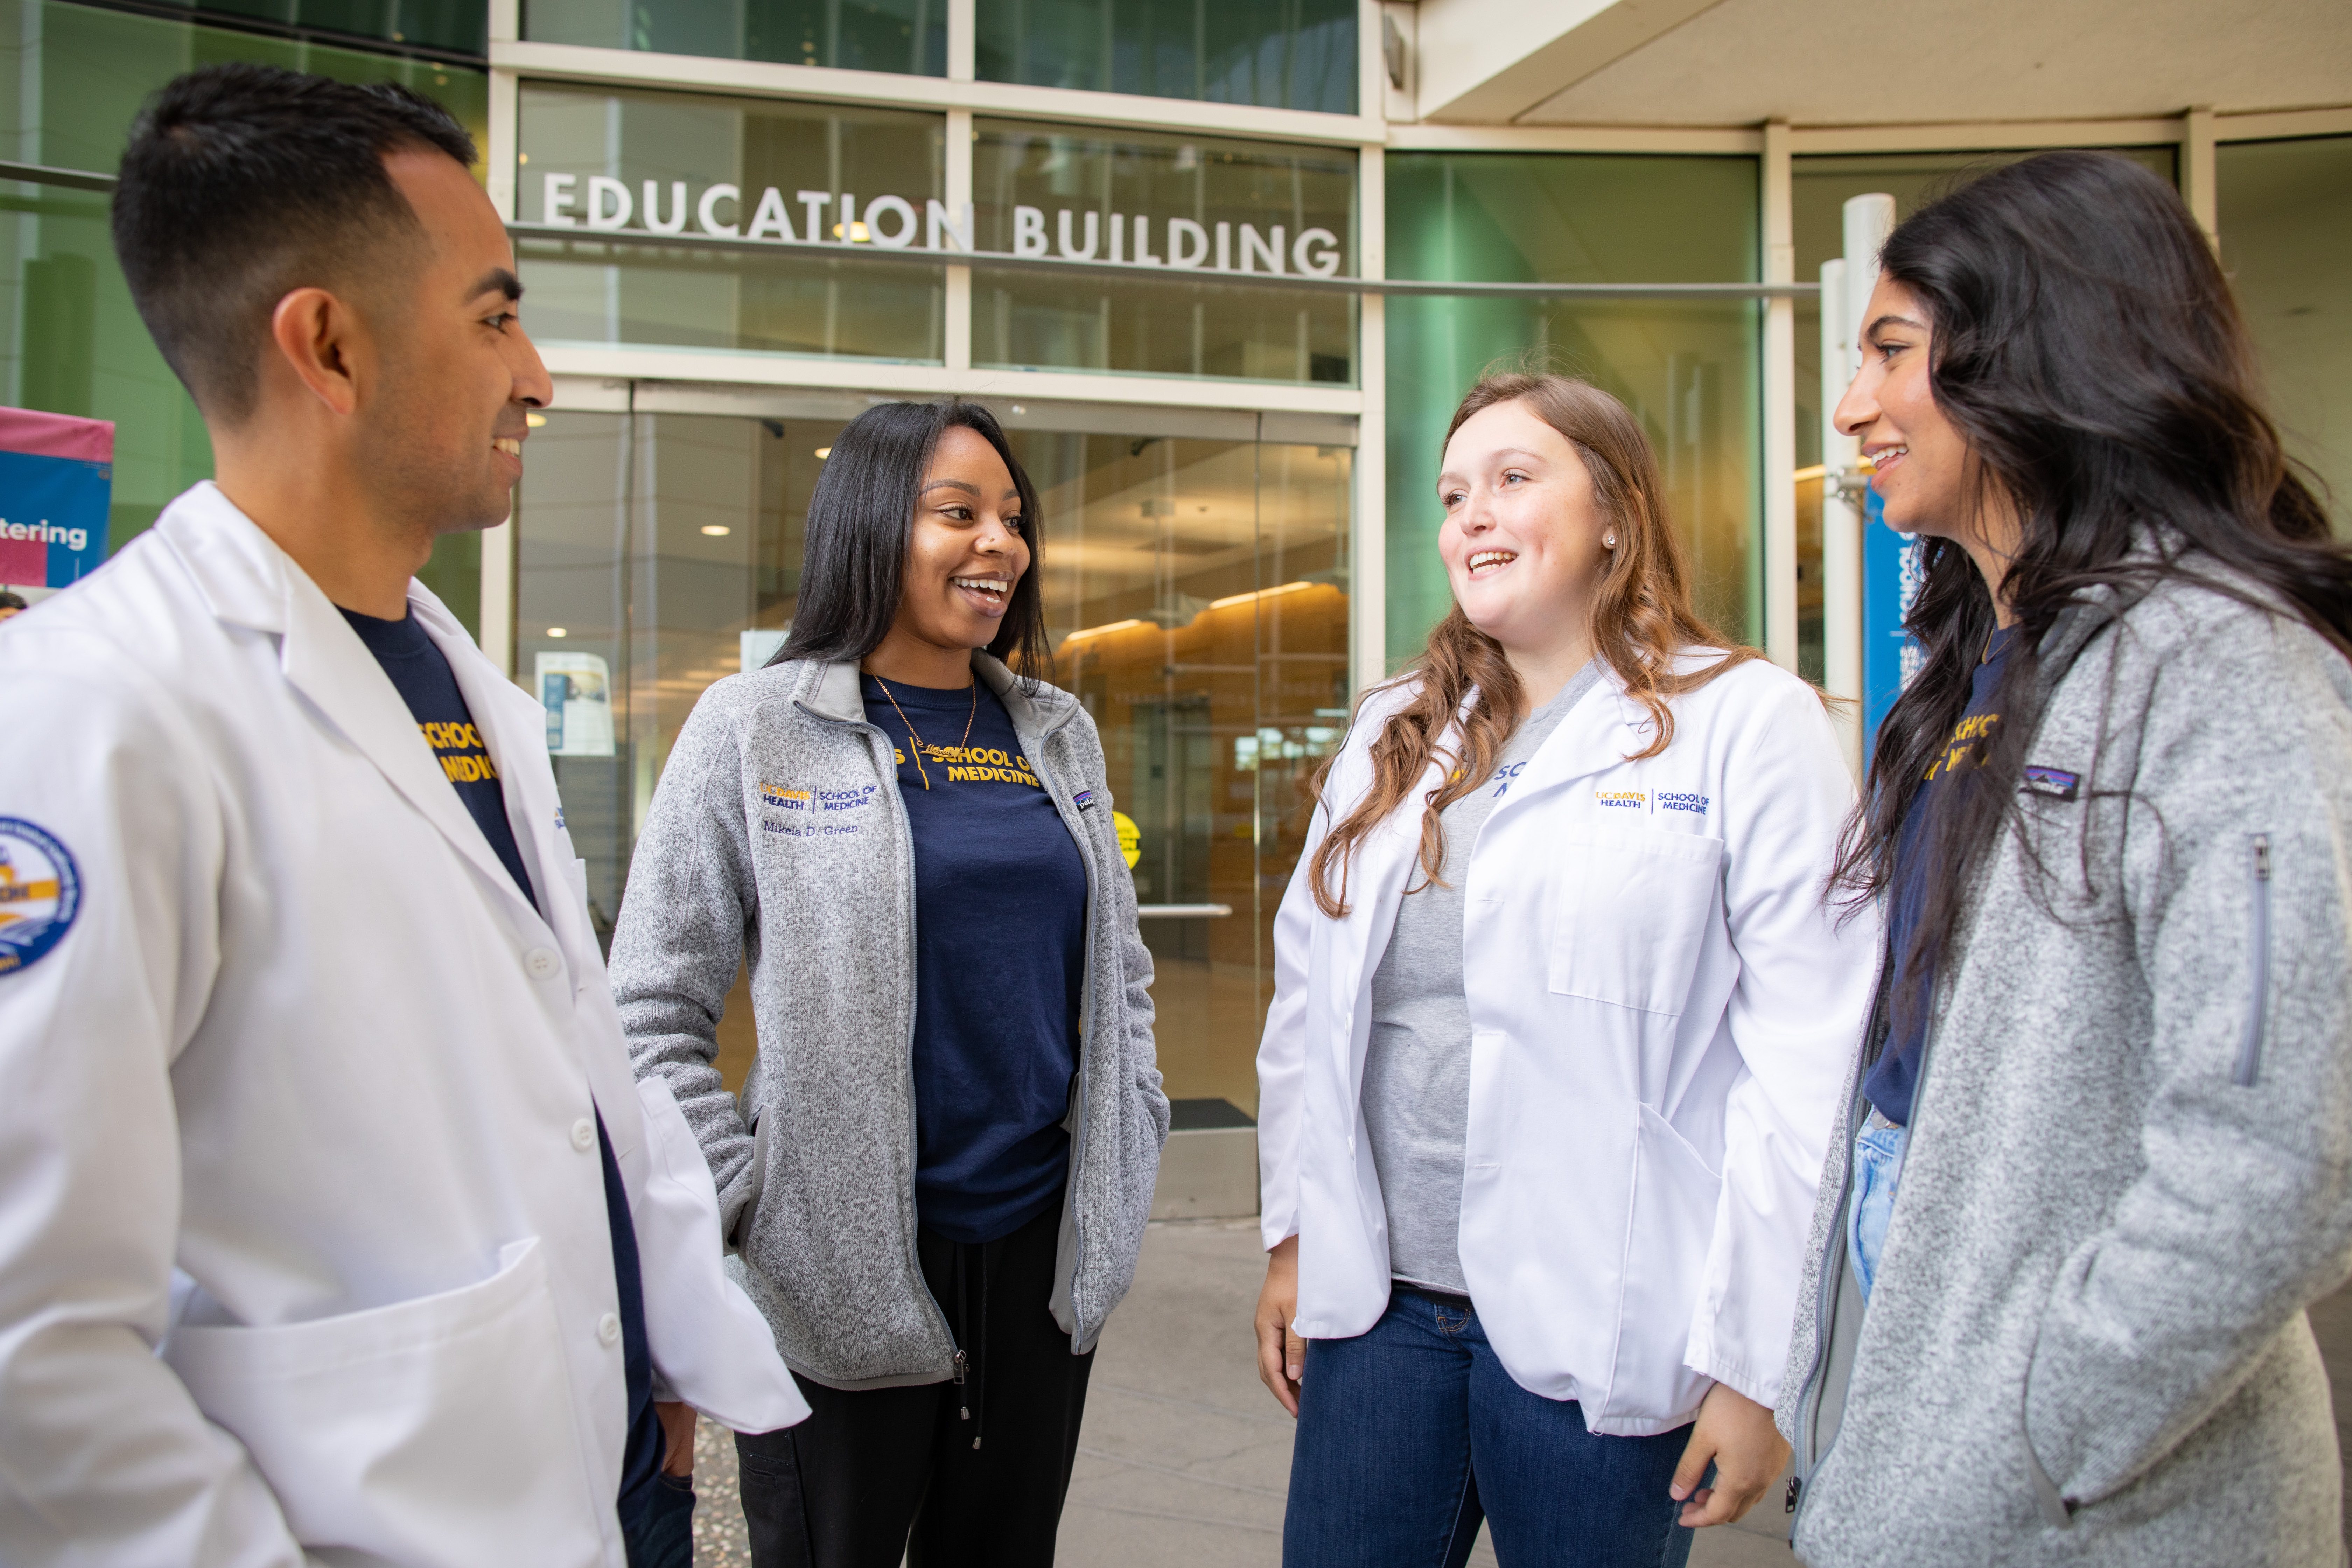 medical school students outside education building